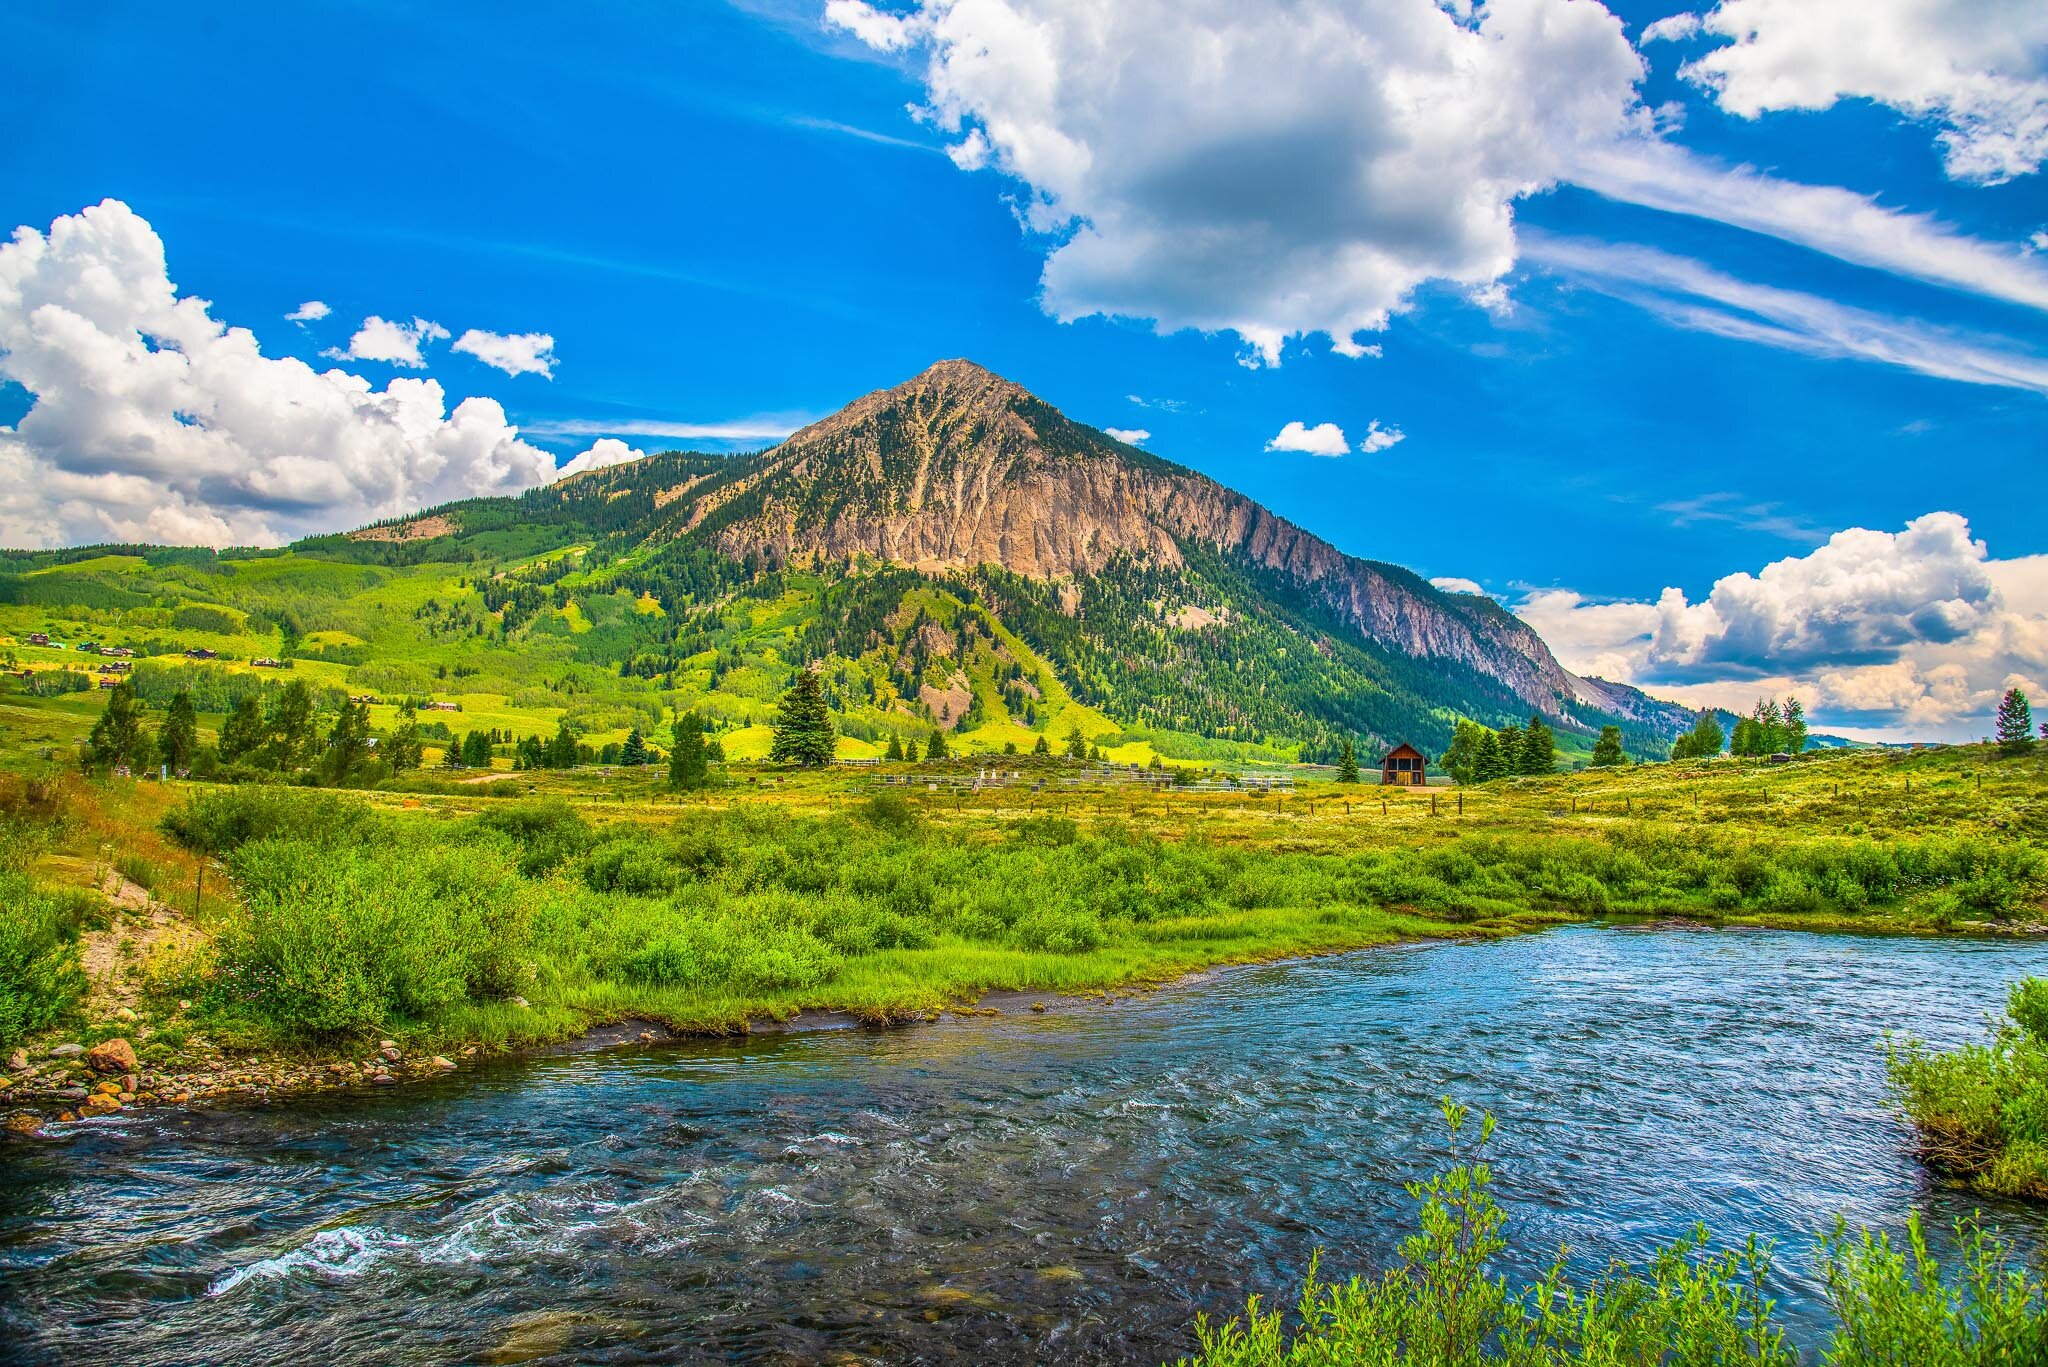 Top Adventure Sports Towns 2021: Crested Butte, Colorado